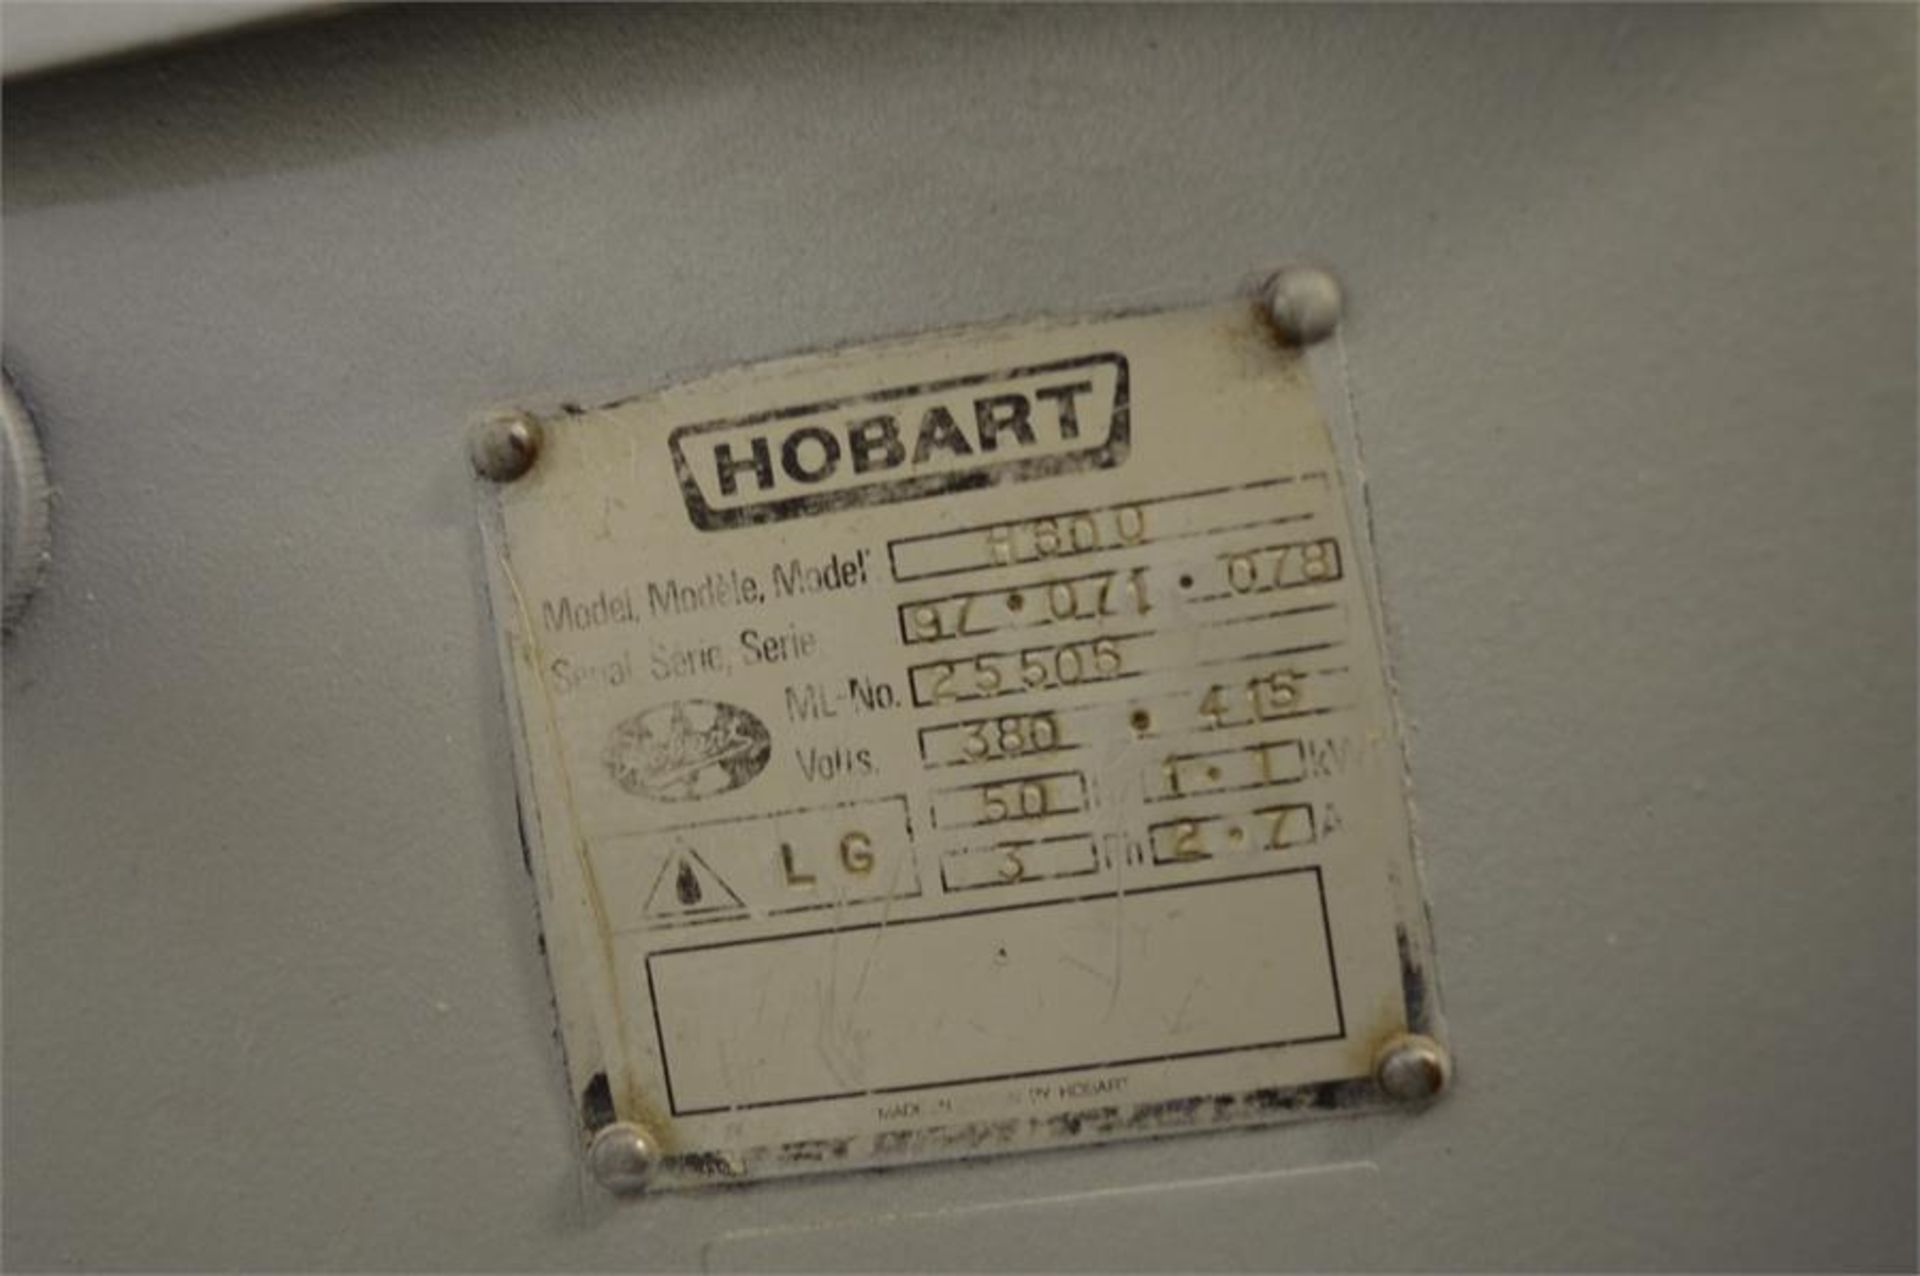 Hobart, Model H600, industrial stand mixer, Serial No. 97.071.078 (Located at Continental - Image 4 of 4